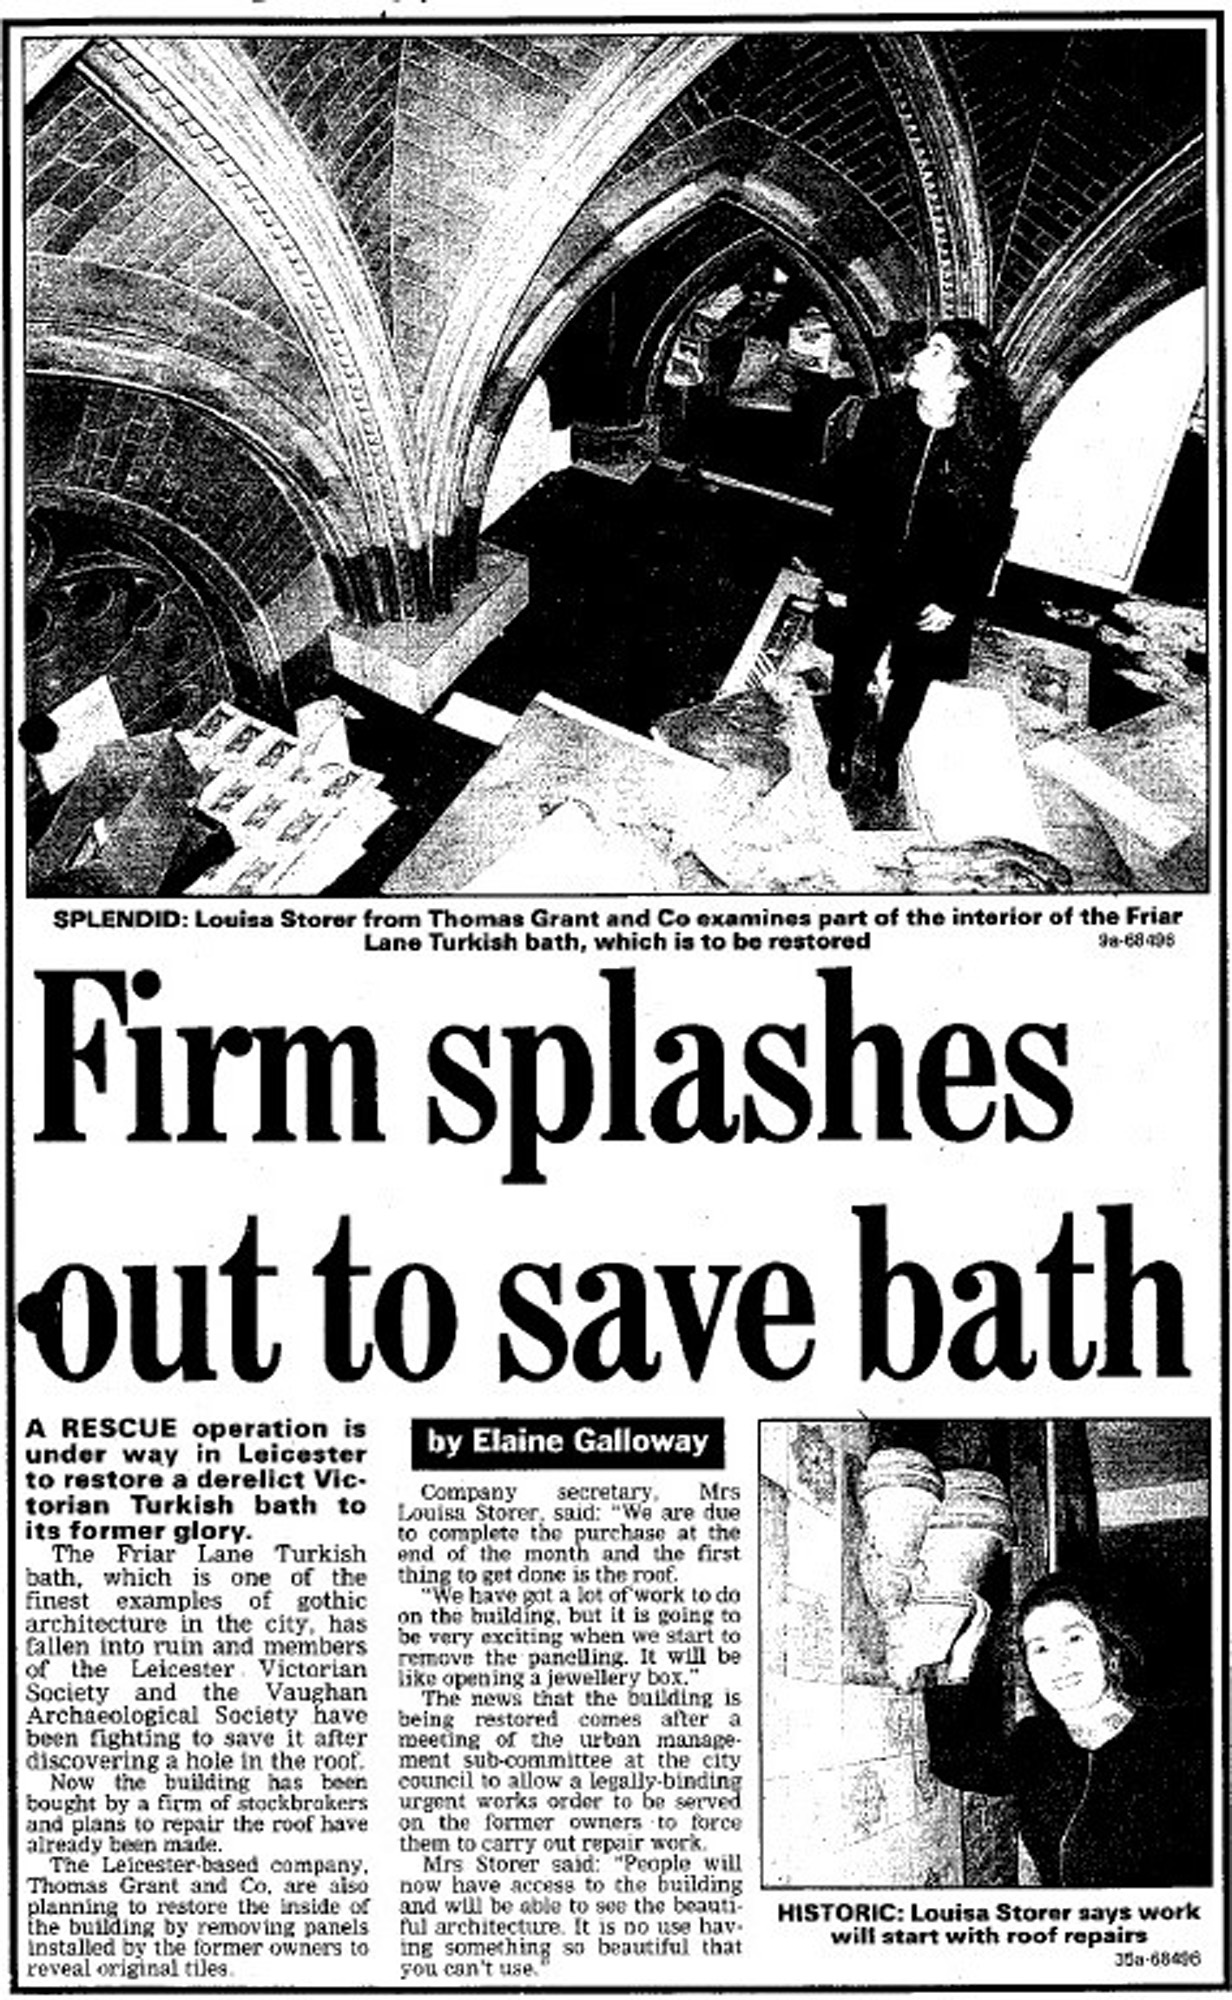 An article from 1999 describing restoration plans for the Turkish Baths - 